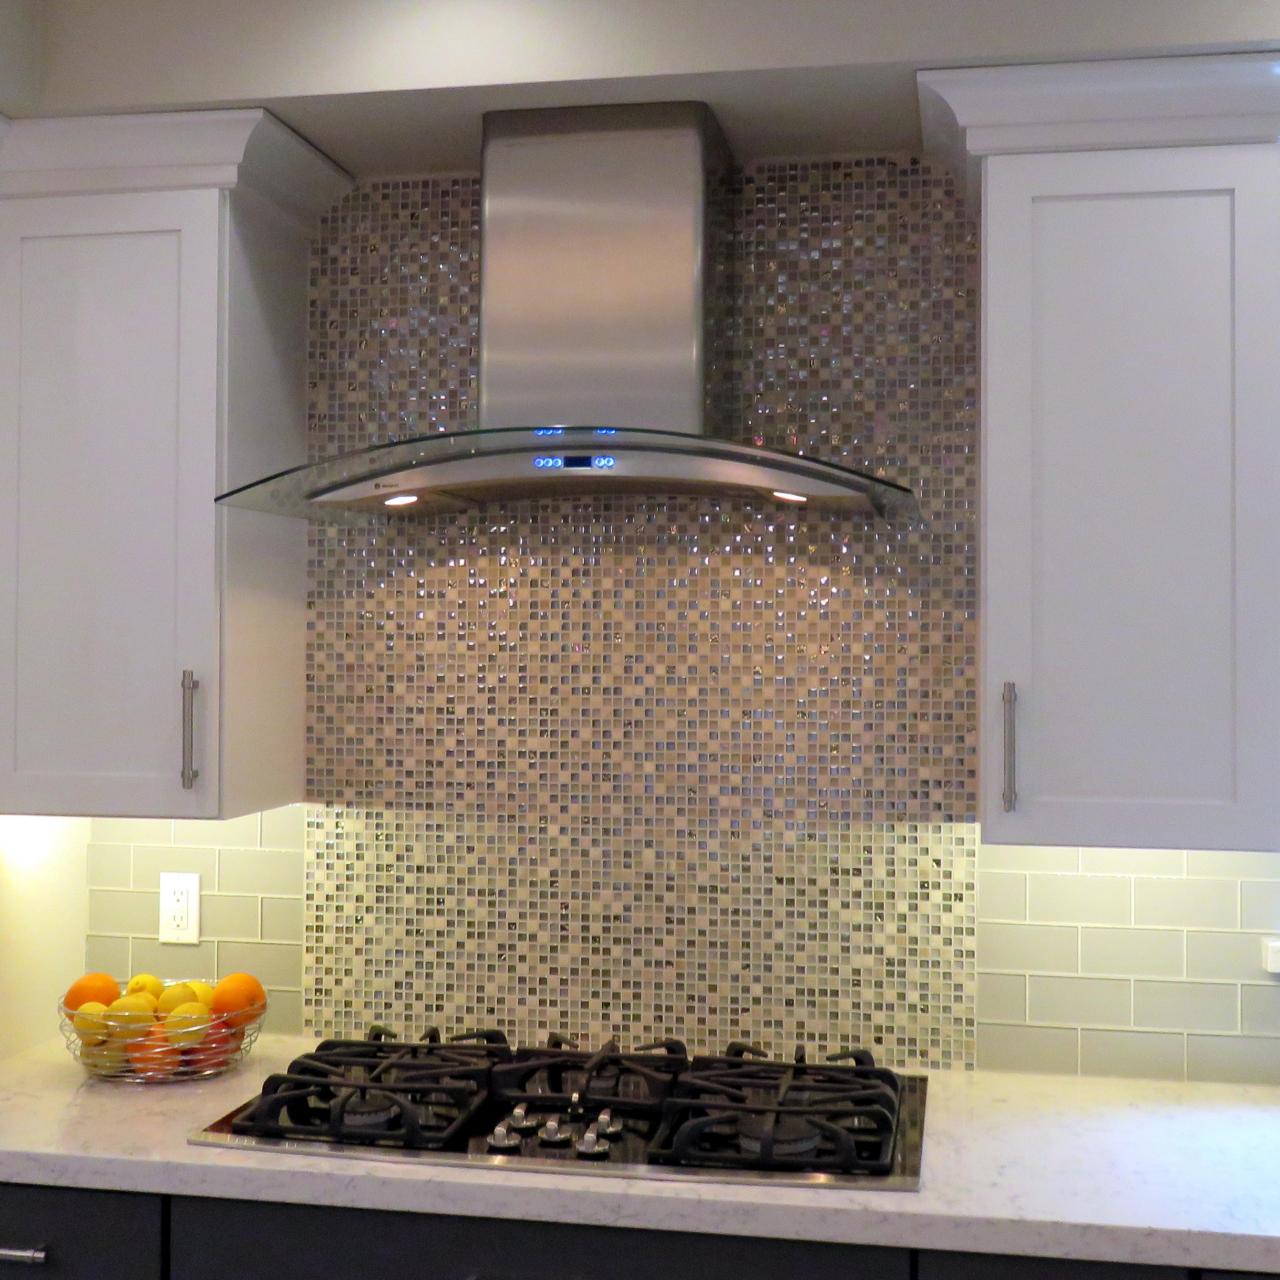 Glass Tile Backsplash in a Modern Kitchen featuring Tones of Browns and Grays HGTV